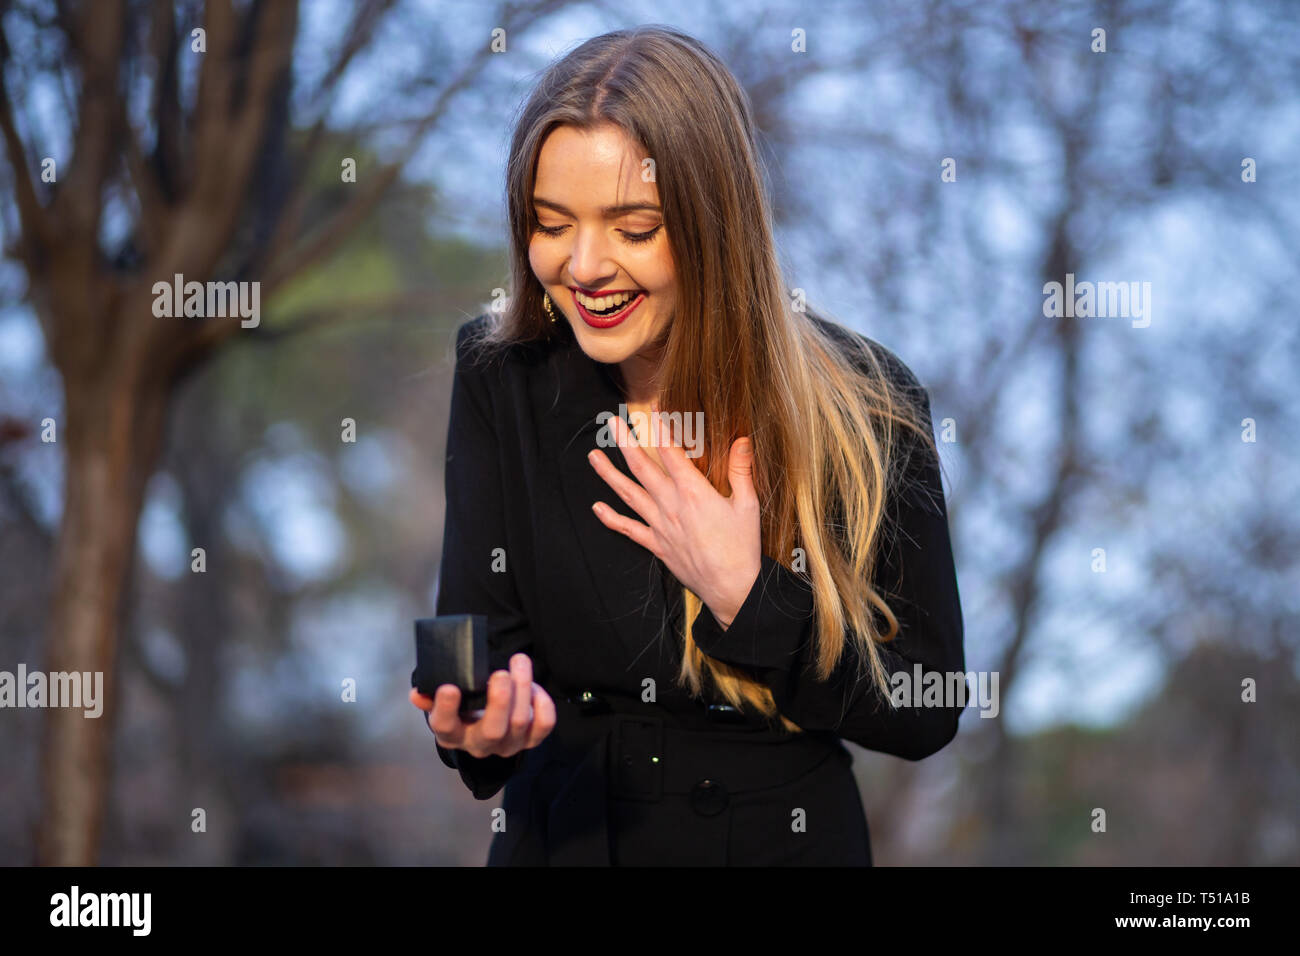 Beautiful young lady in stylish outfit looking at wedding ring in box while standing on blurred background of park Stock Photo